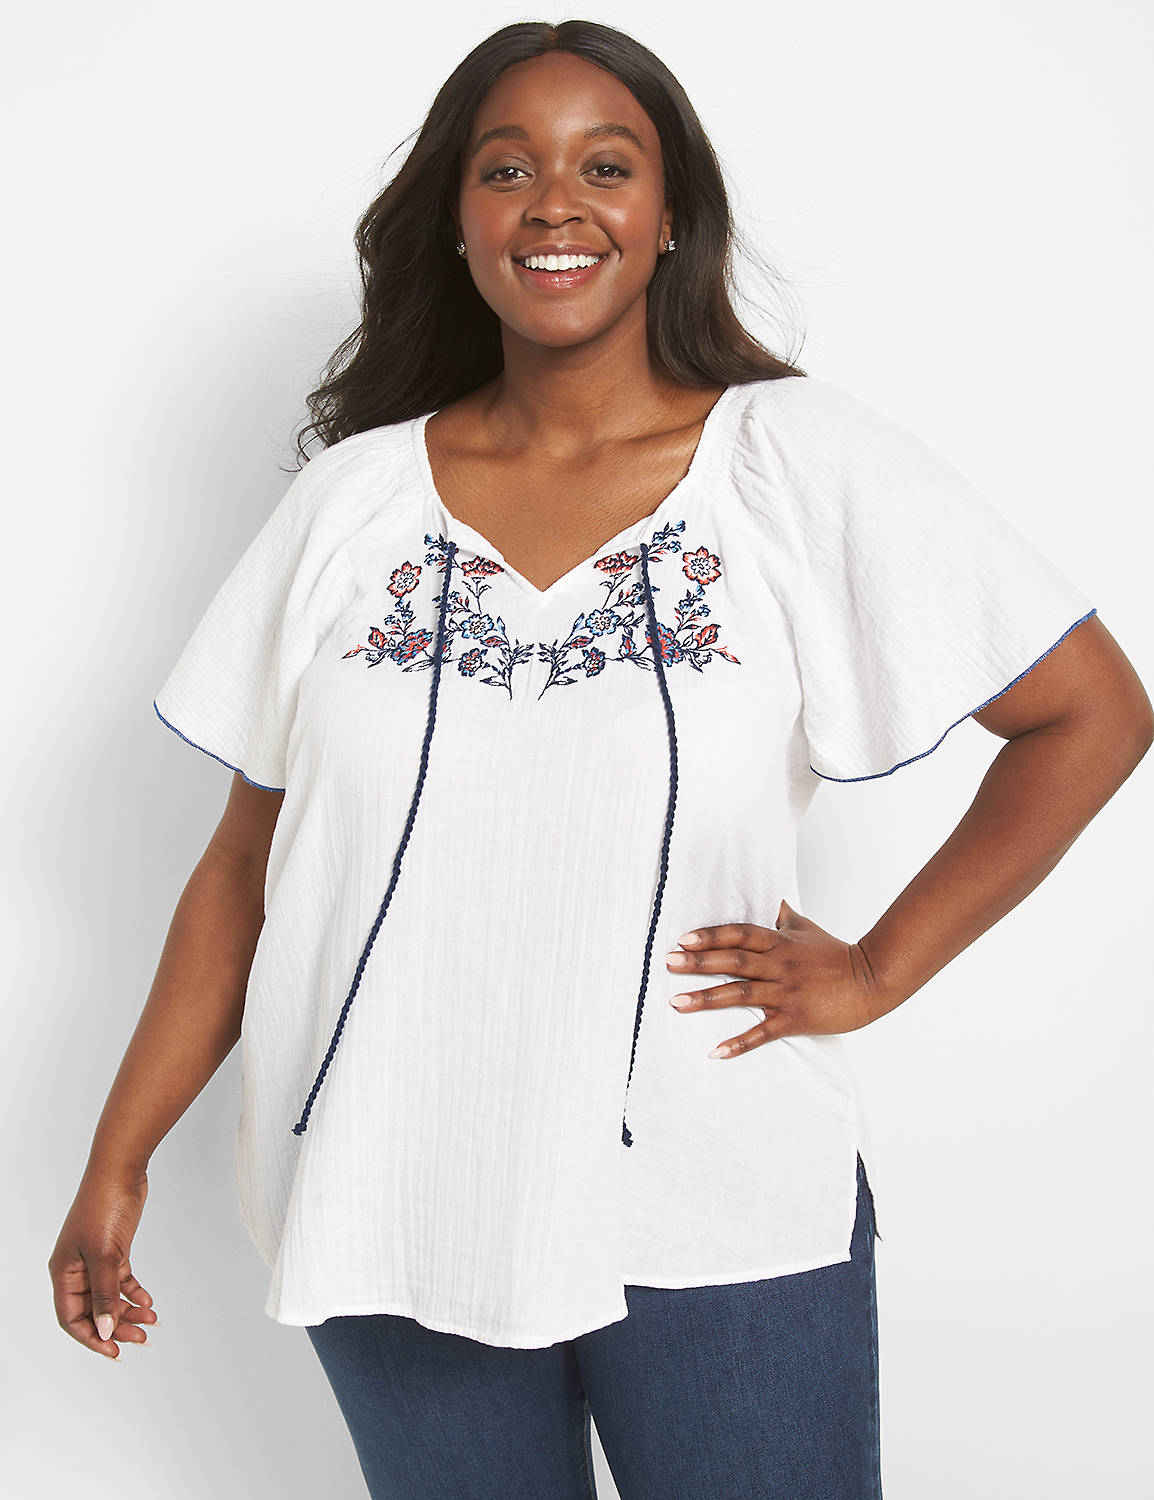 Details about   NWT Lane Bryant Split-Sleeve Convertible Neckline Tee Size 26/28 Orig $45 